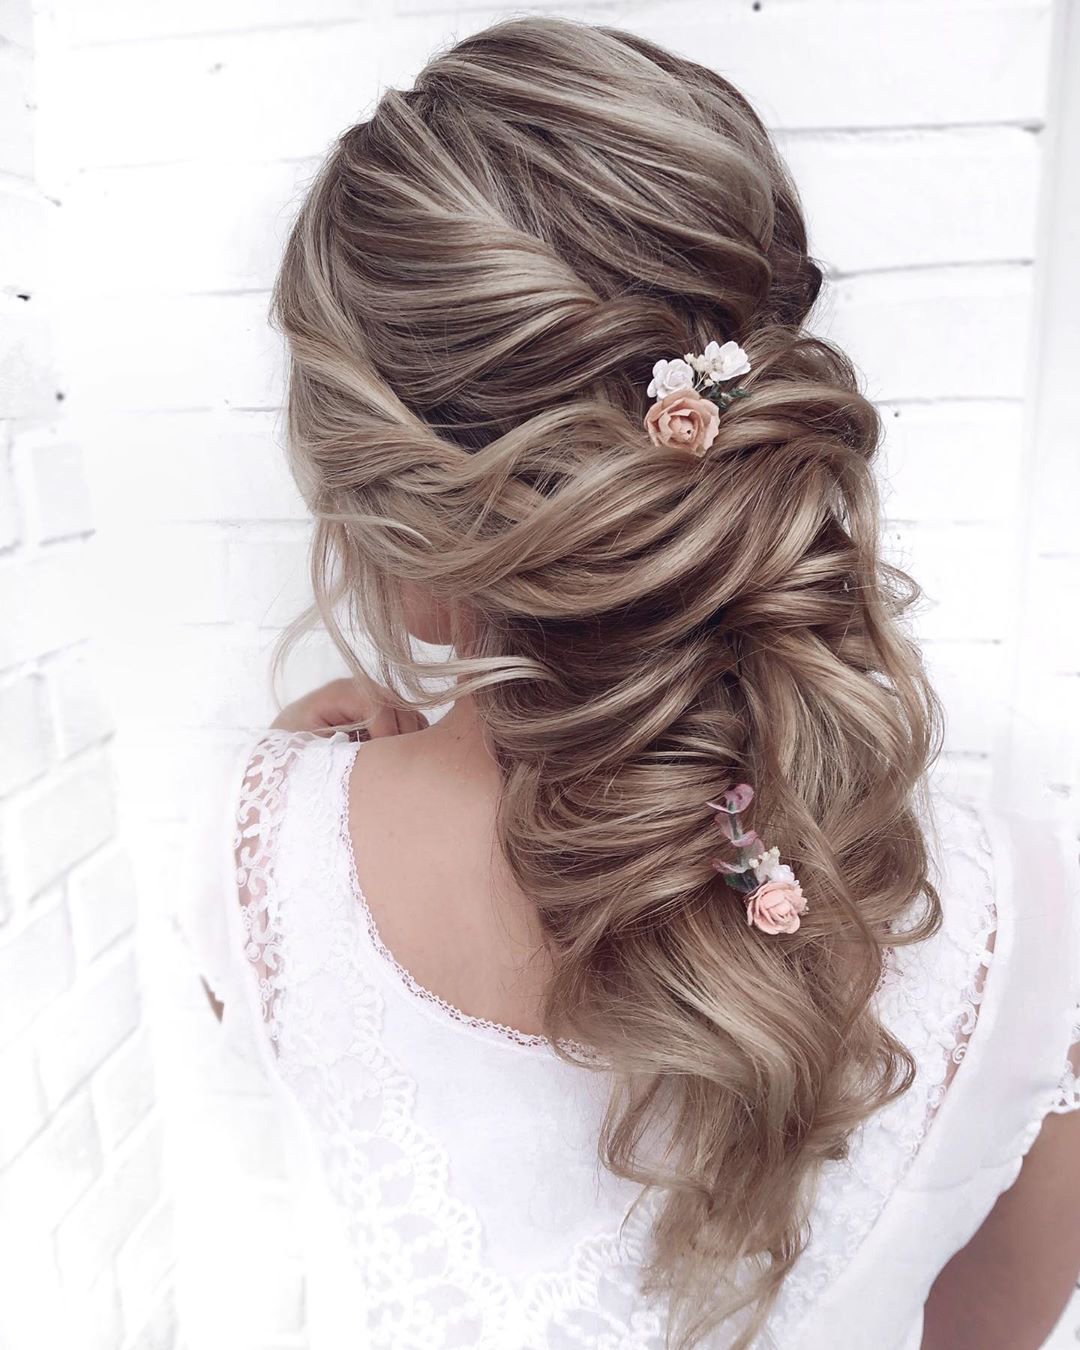 29++ Wedding hairstyles for thin hair information